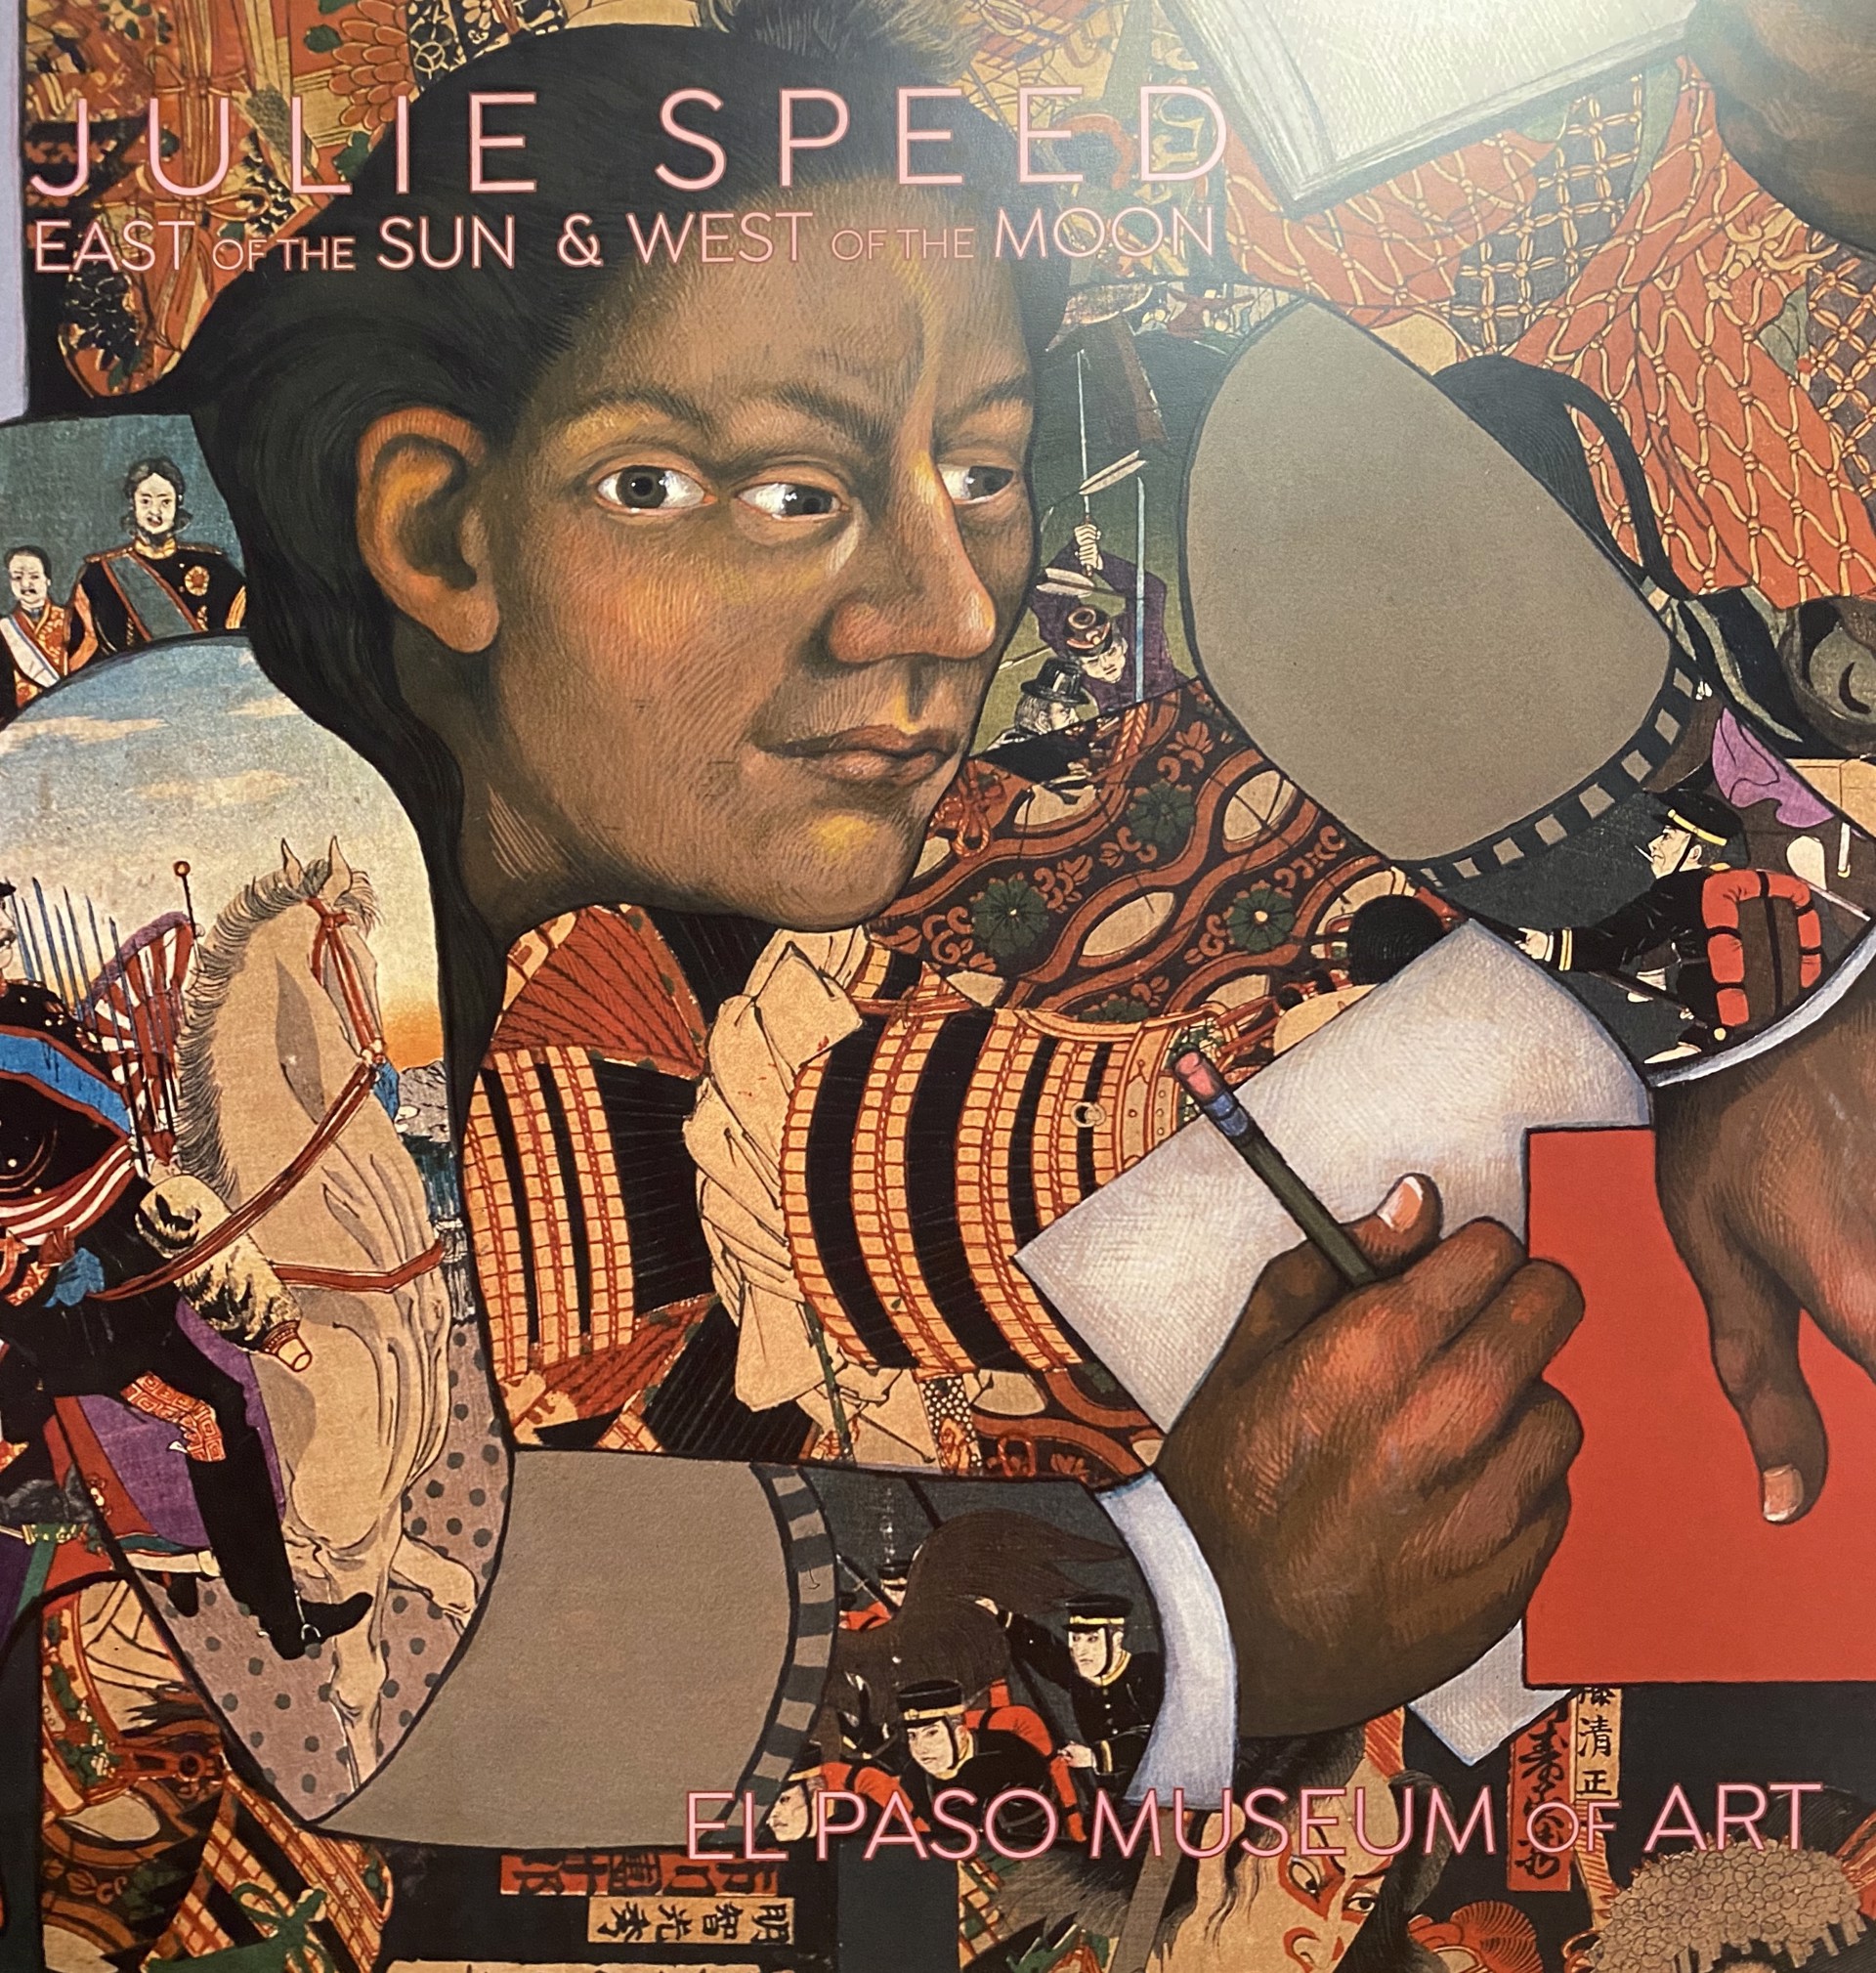 Julie Speed: East of the Sun & West of the Moon (Softcover) by Julie Speed